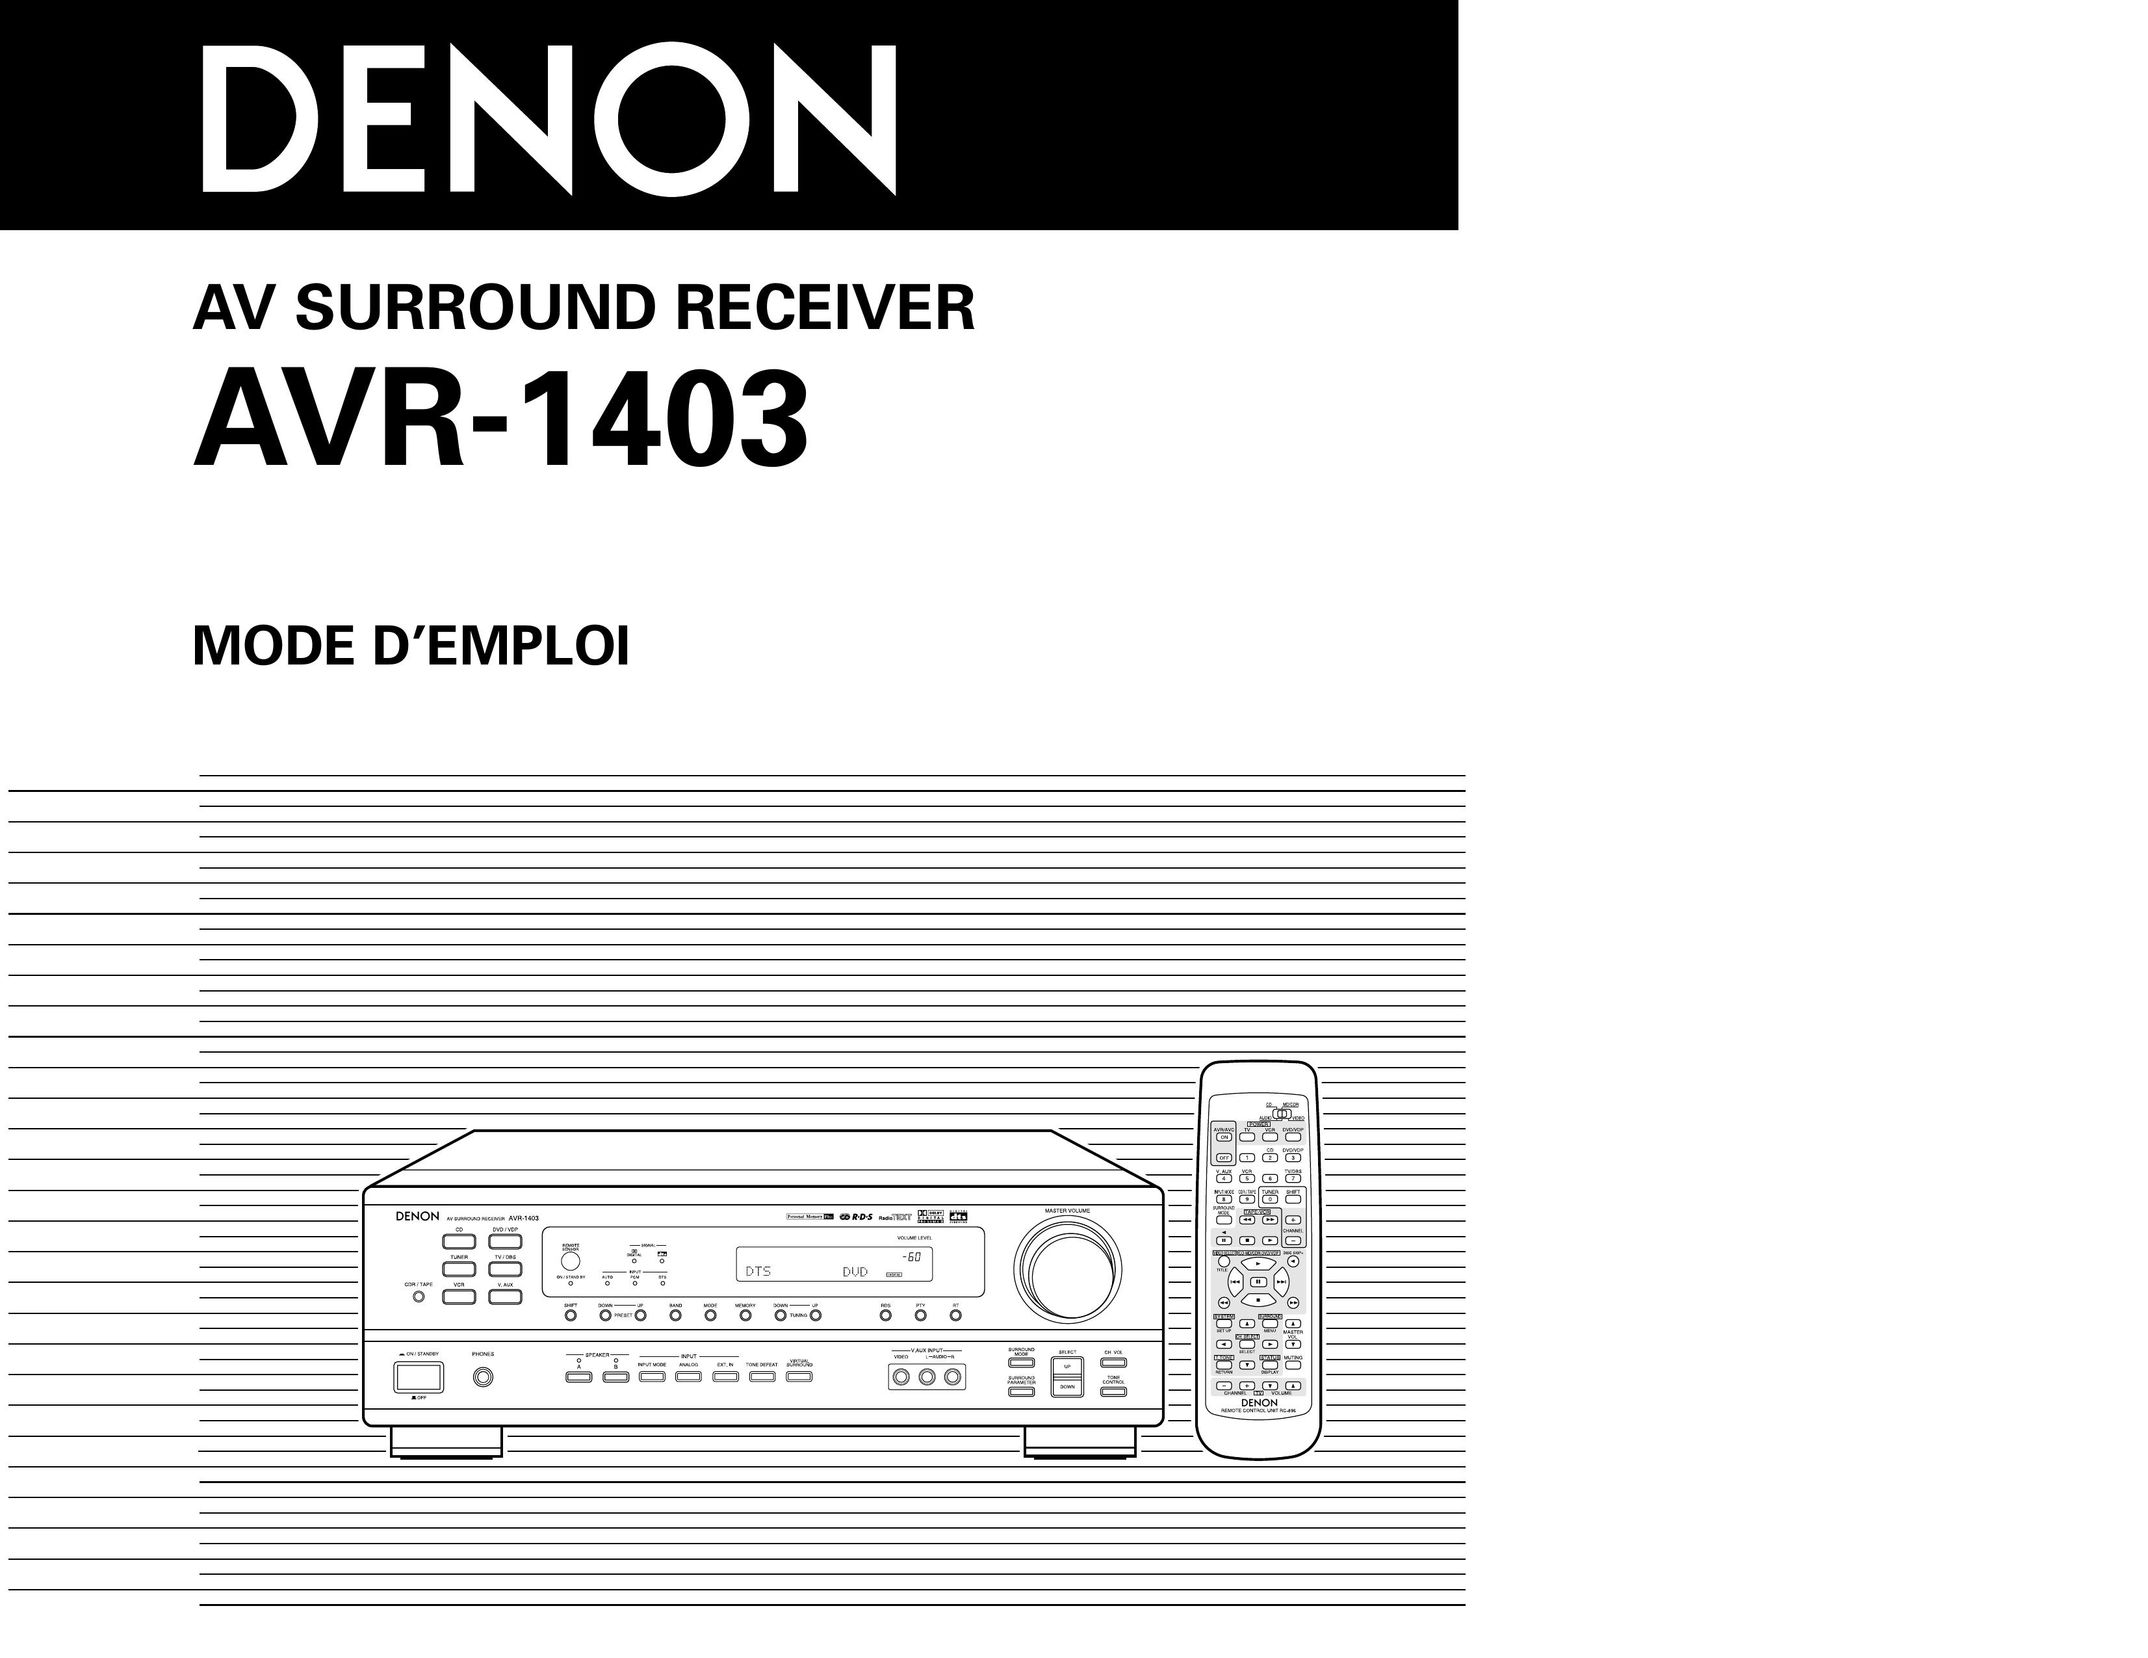 Denon AVR-1403 Home Theater System User Manual